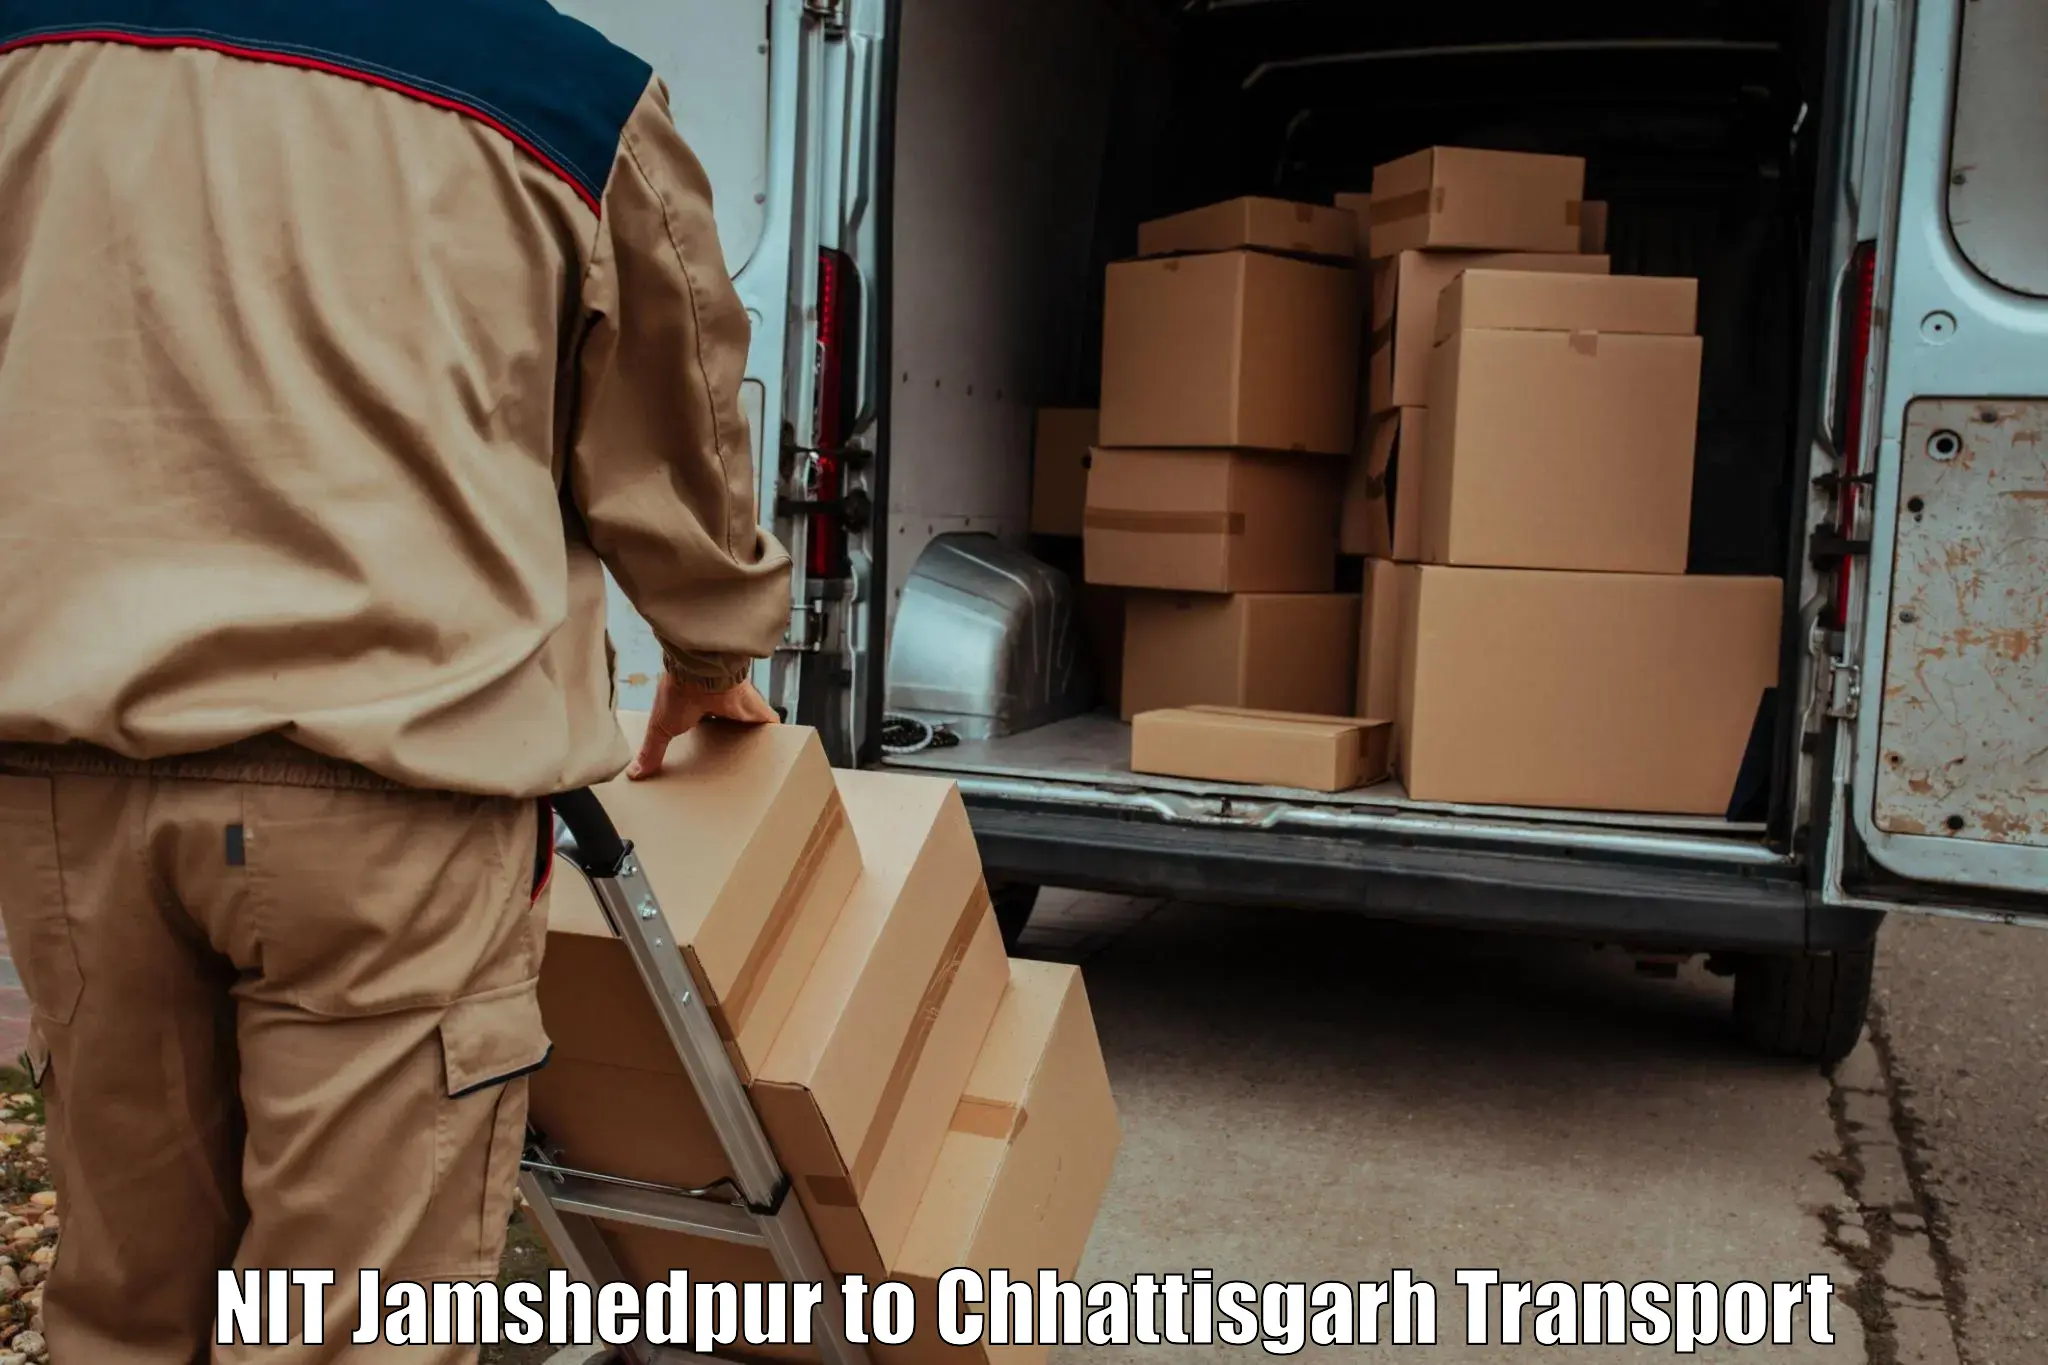 Goods delivery service NIT Jamshedpur to Saraipali